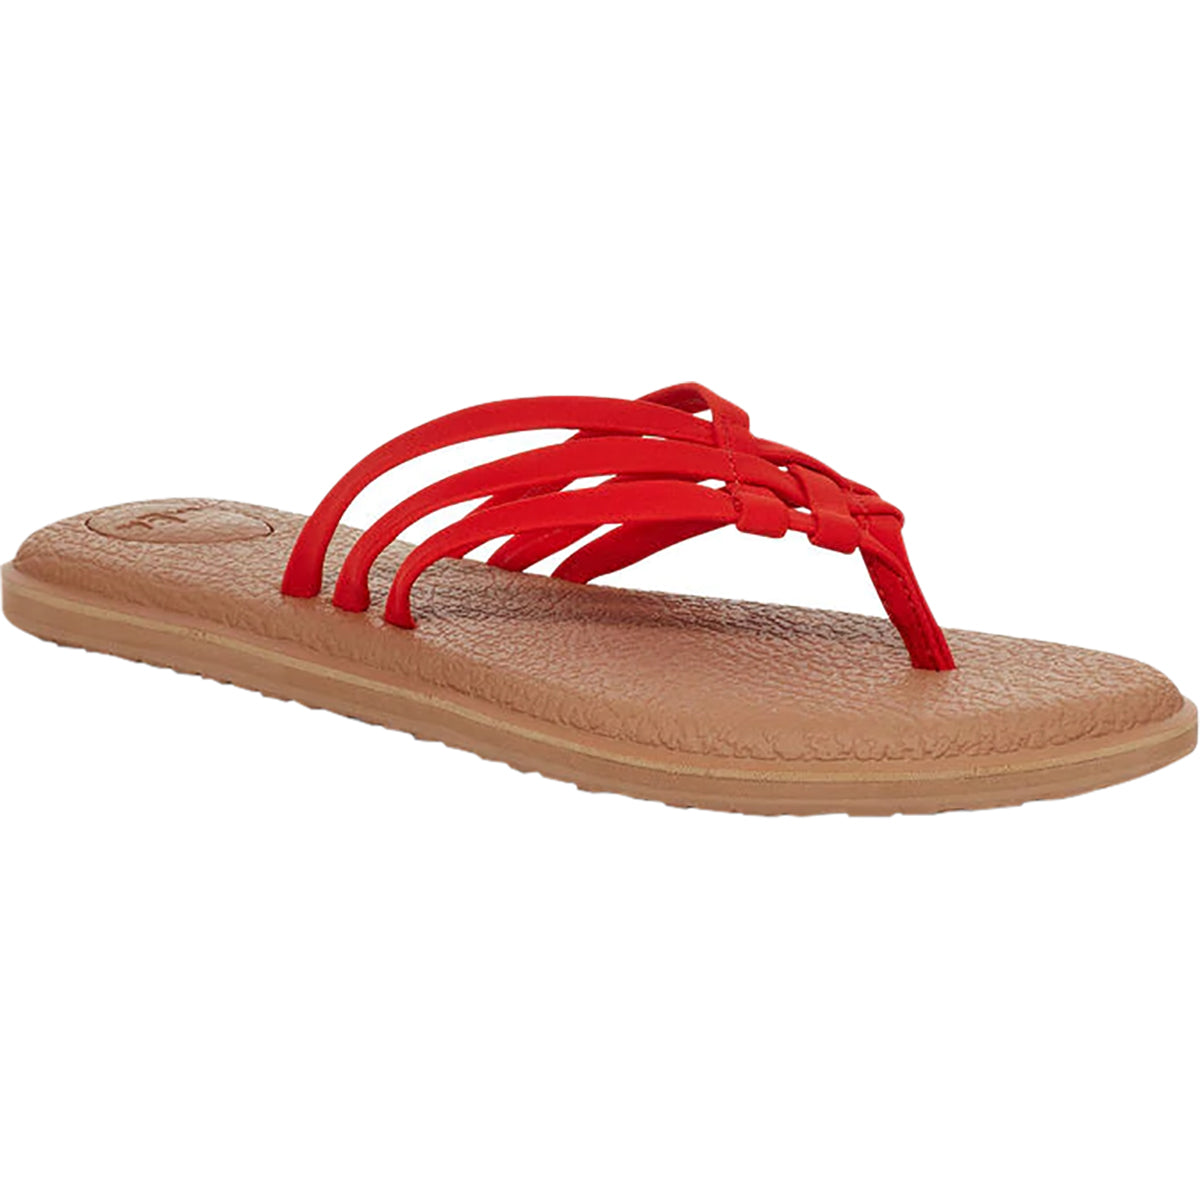 Yoga Sandals, Yoga for your Feet